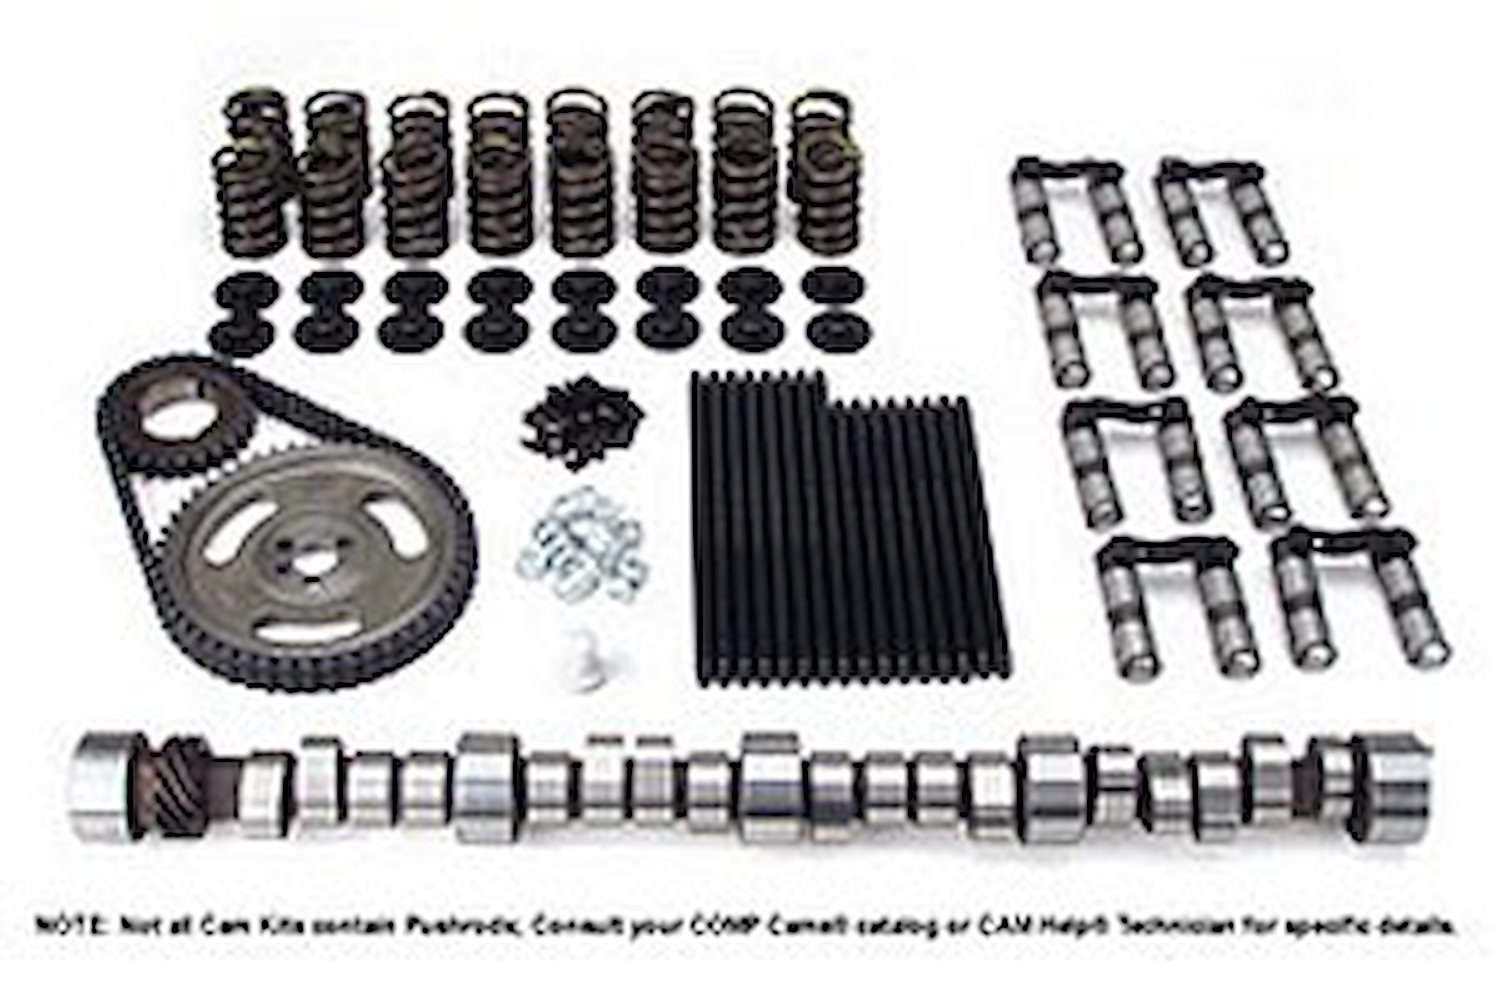 Computer Controlled Hydraulic Roller Tappet Camshaft Complete Kit RPM Range: 1000-5000